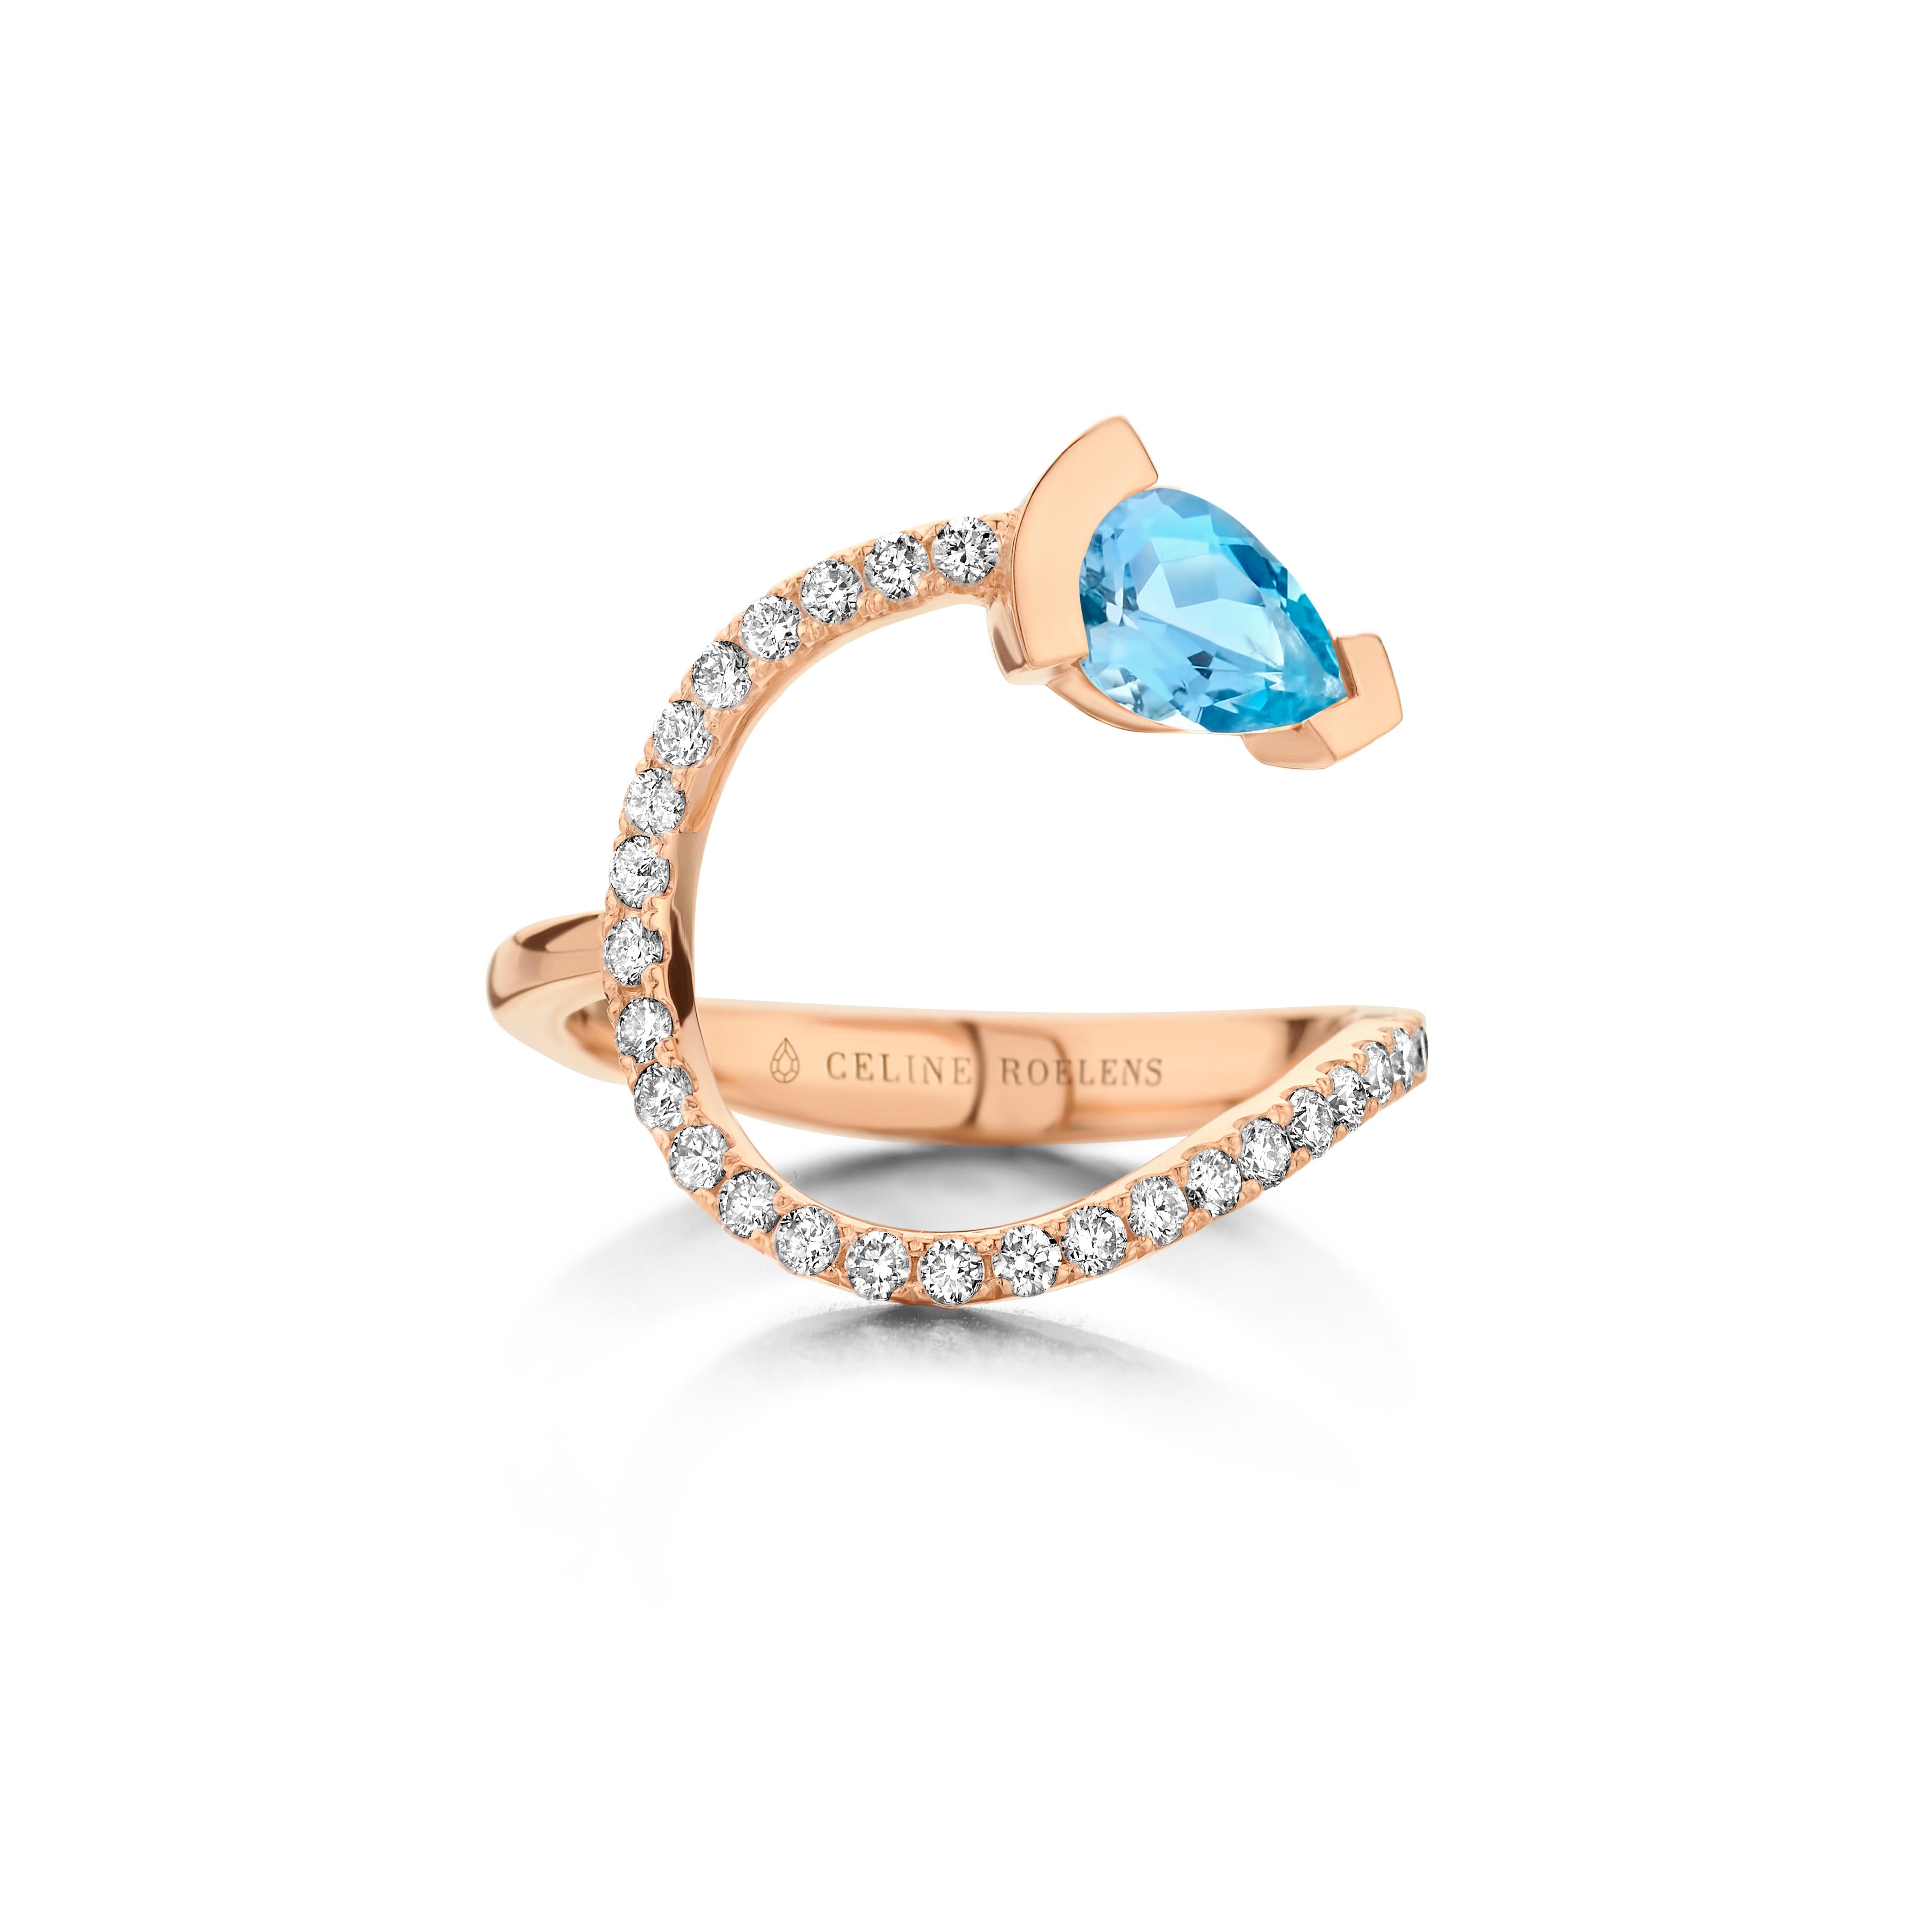 ADELINE curved ring in 18Kt white gold set with a pear shaped Aquamarine and 0,33 Ct of white brilliant cut diamonds - VS F quality.